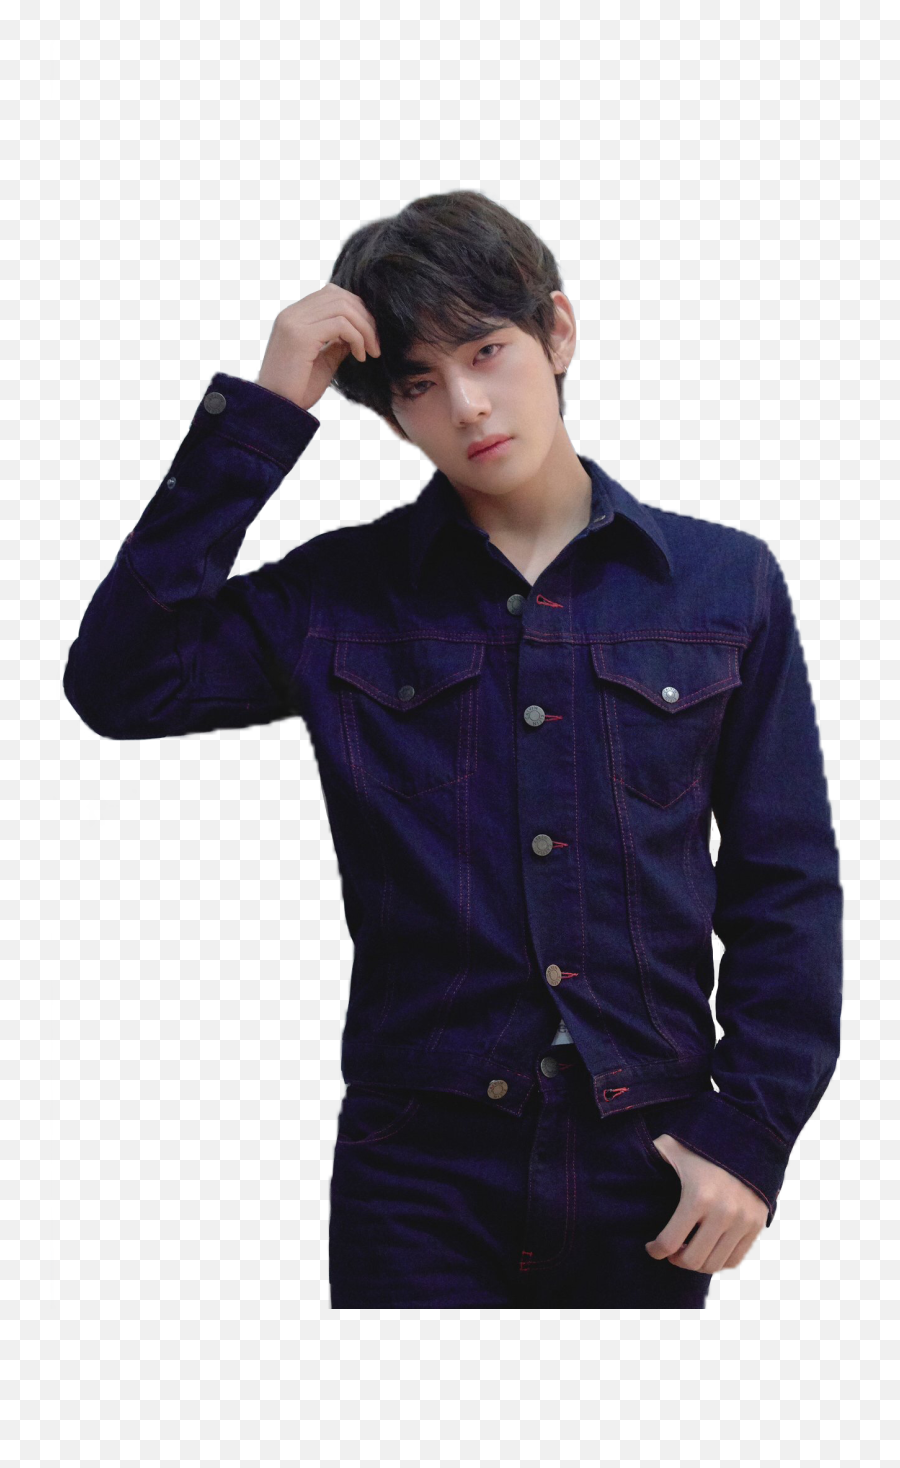 V Love Yourself Tear Photoshoot - Bts Love Yourself Tear Concept Png,Kim Taehyung Png